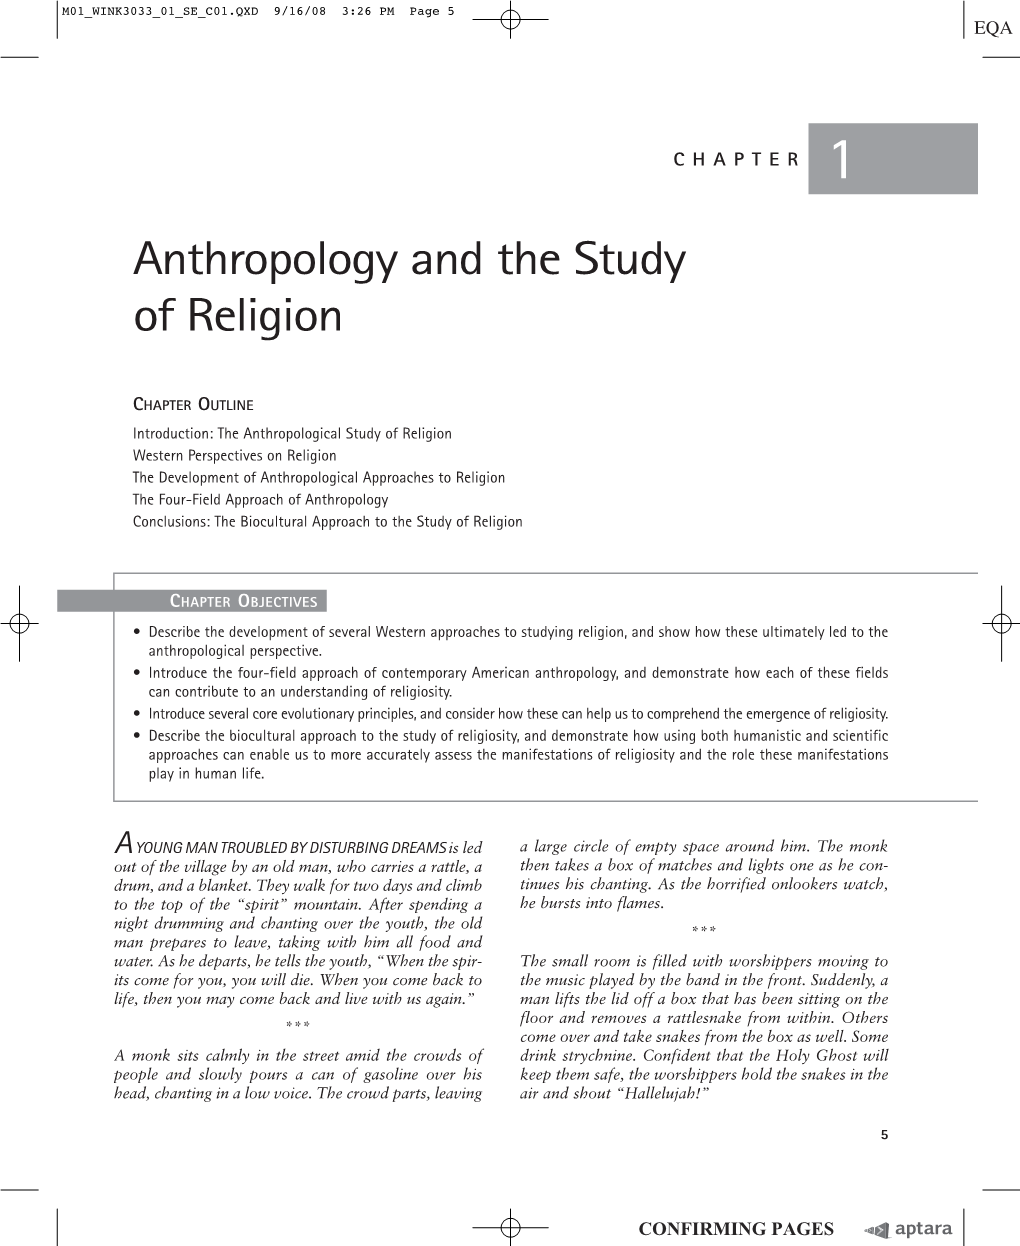 Anthropology and the Study of Religion